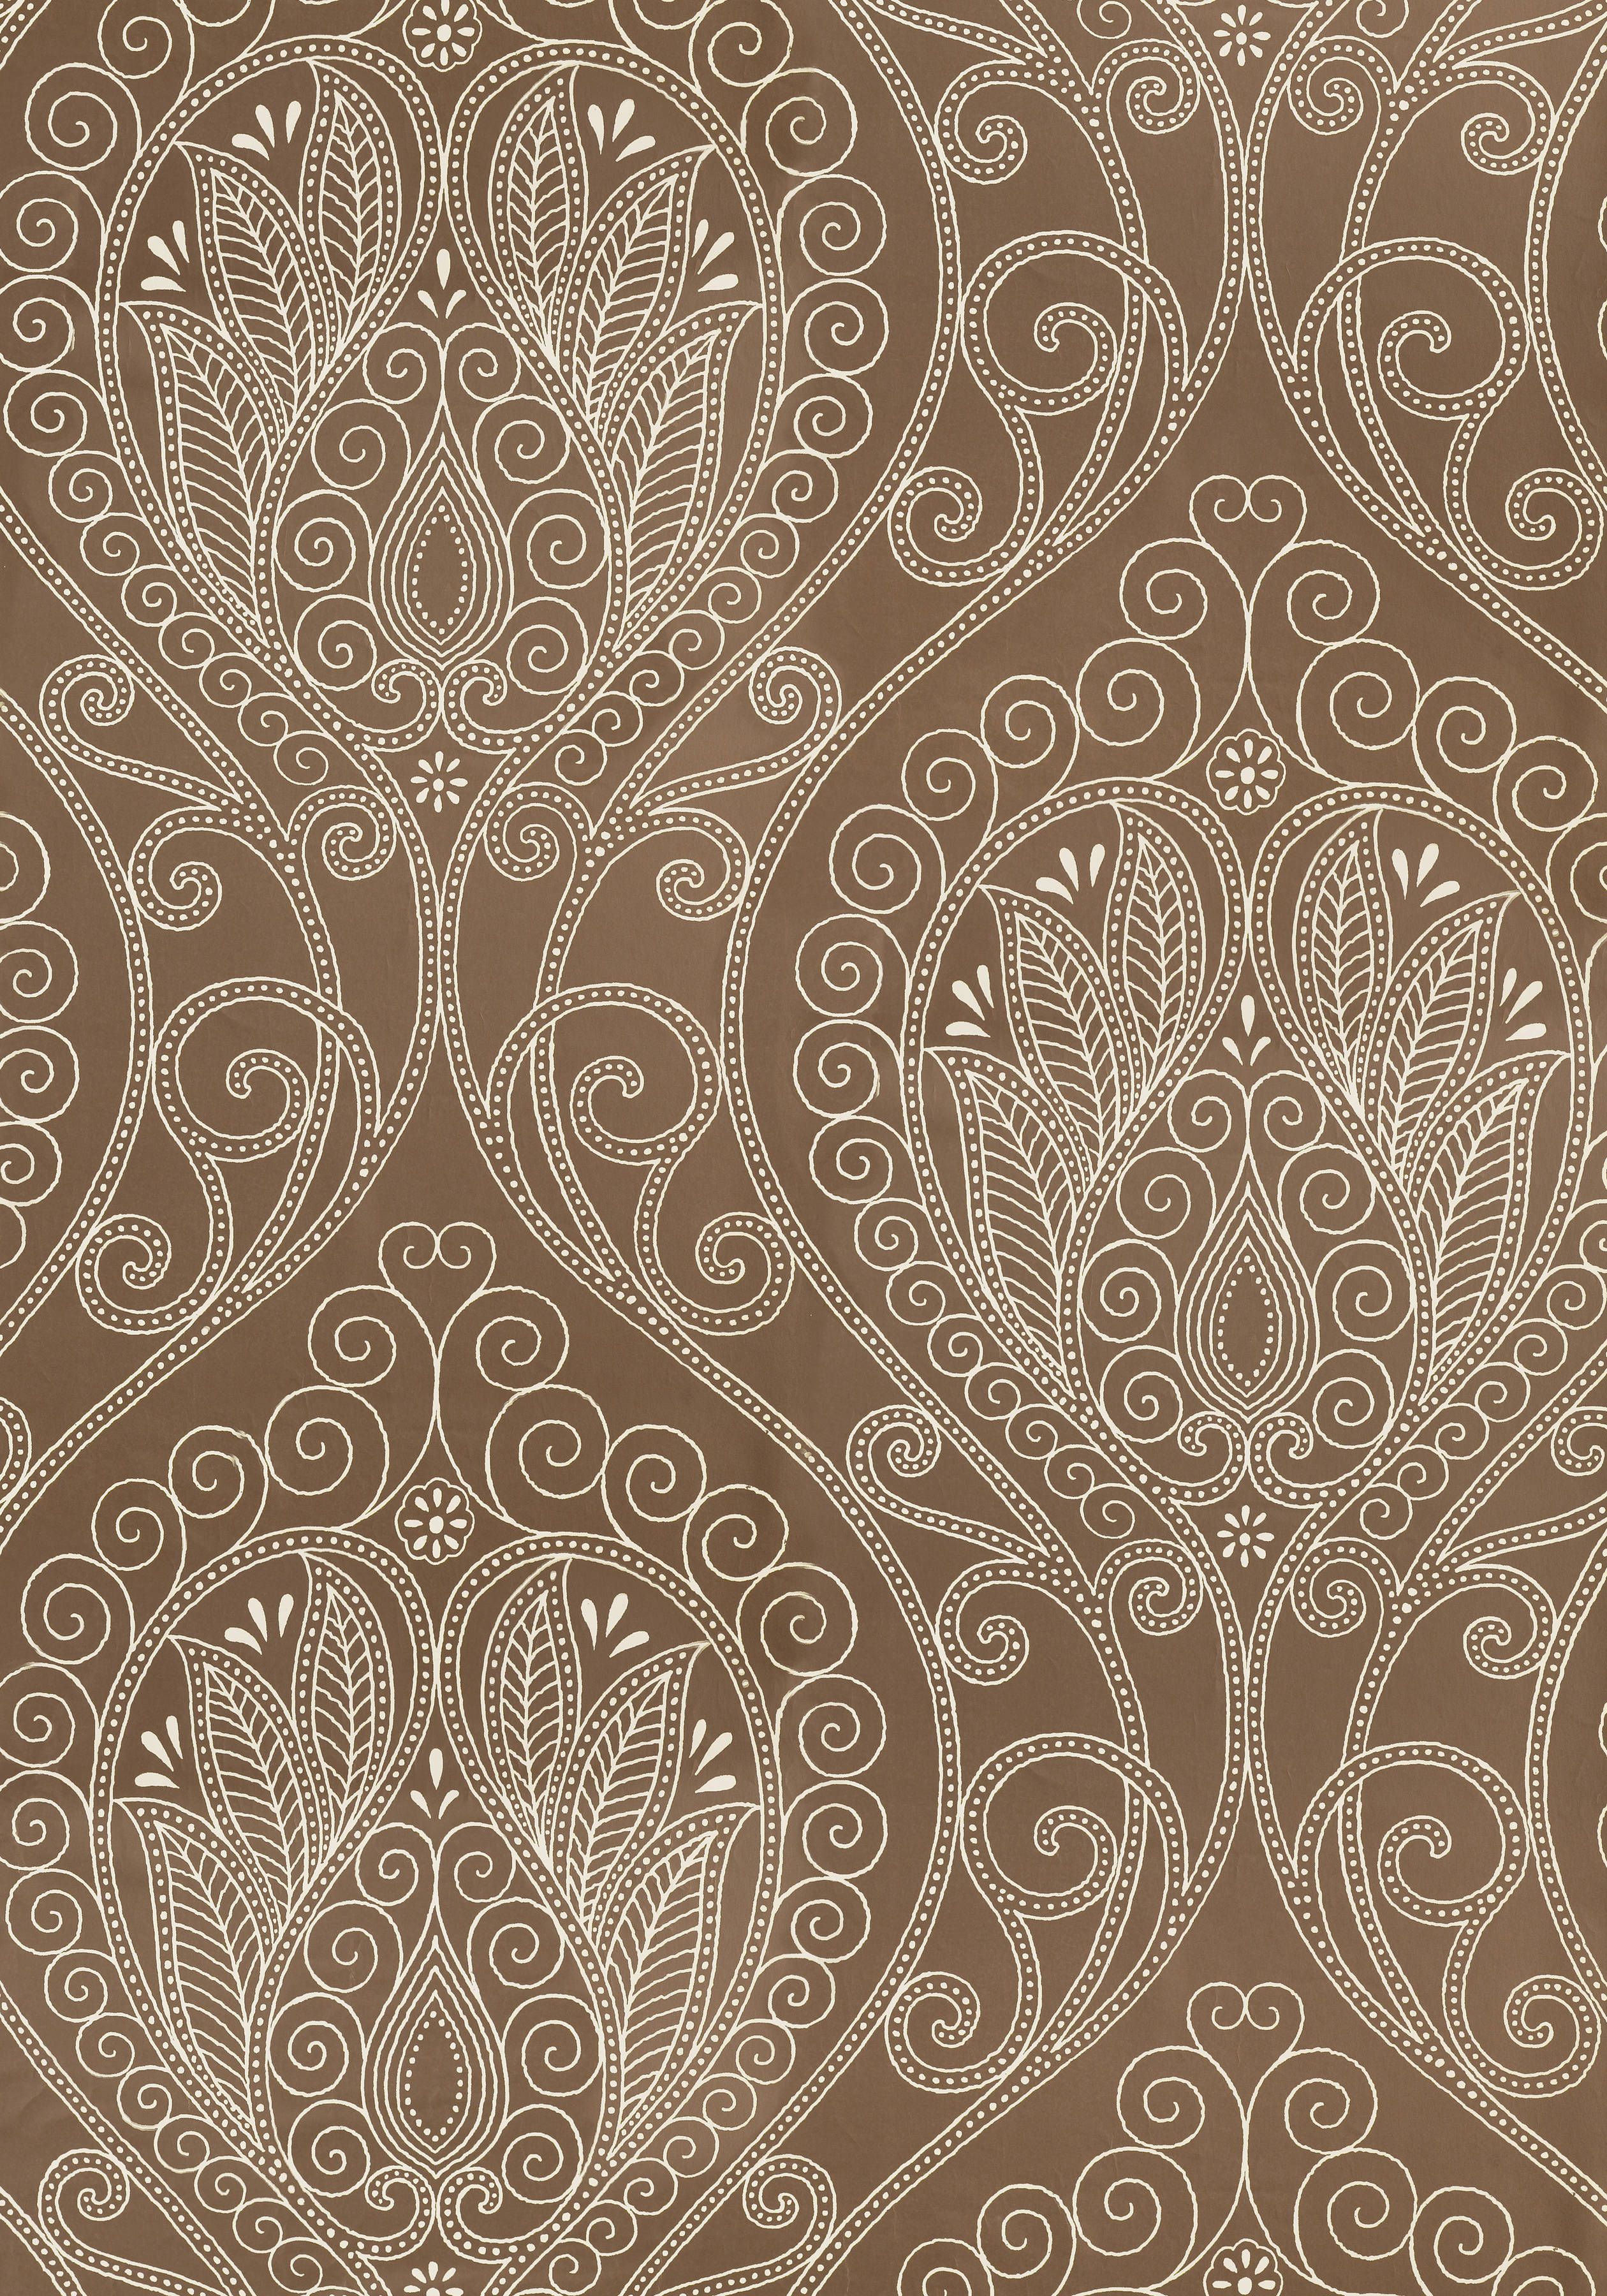 Large-scale Wallpaper Patterns - Textile , HD Wallpaper & Backgrounds